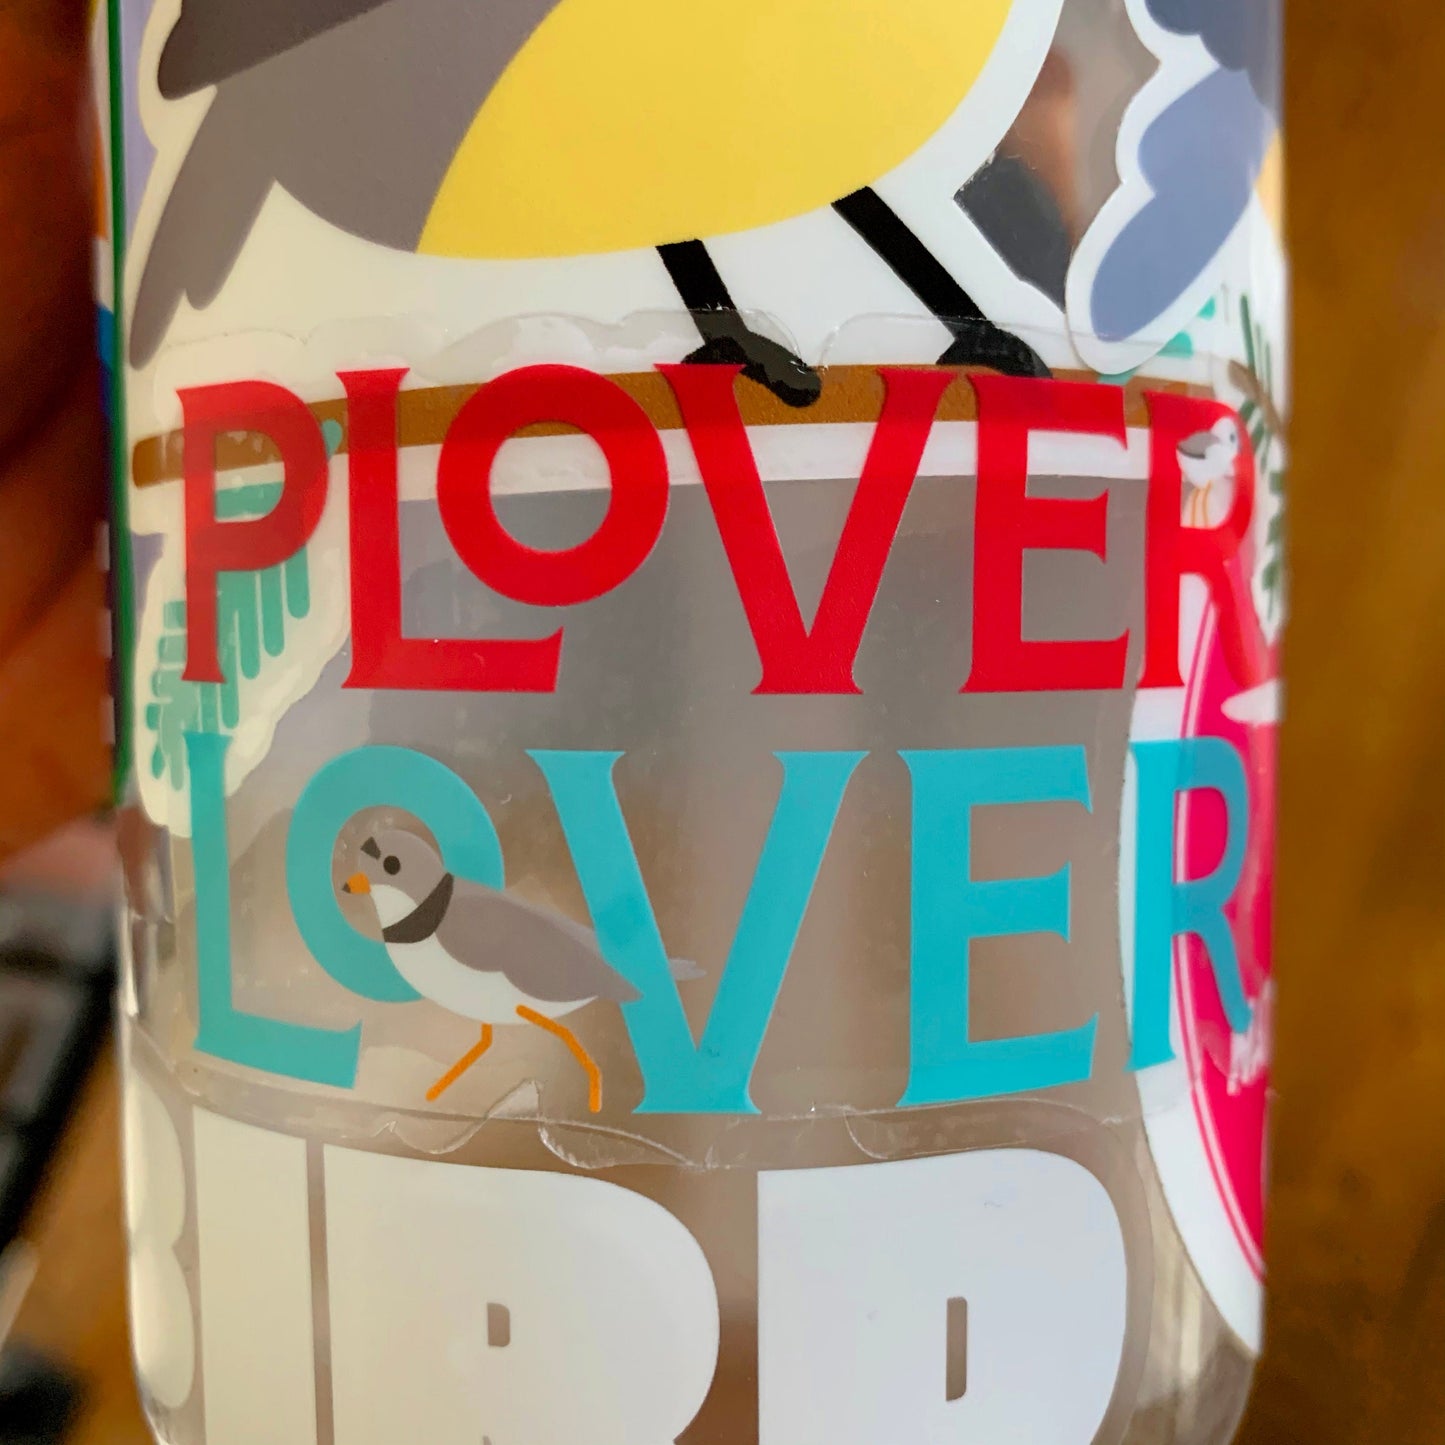 Plover Lover: Piping Plover sticker (3 inch)